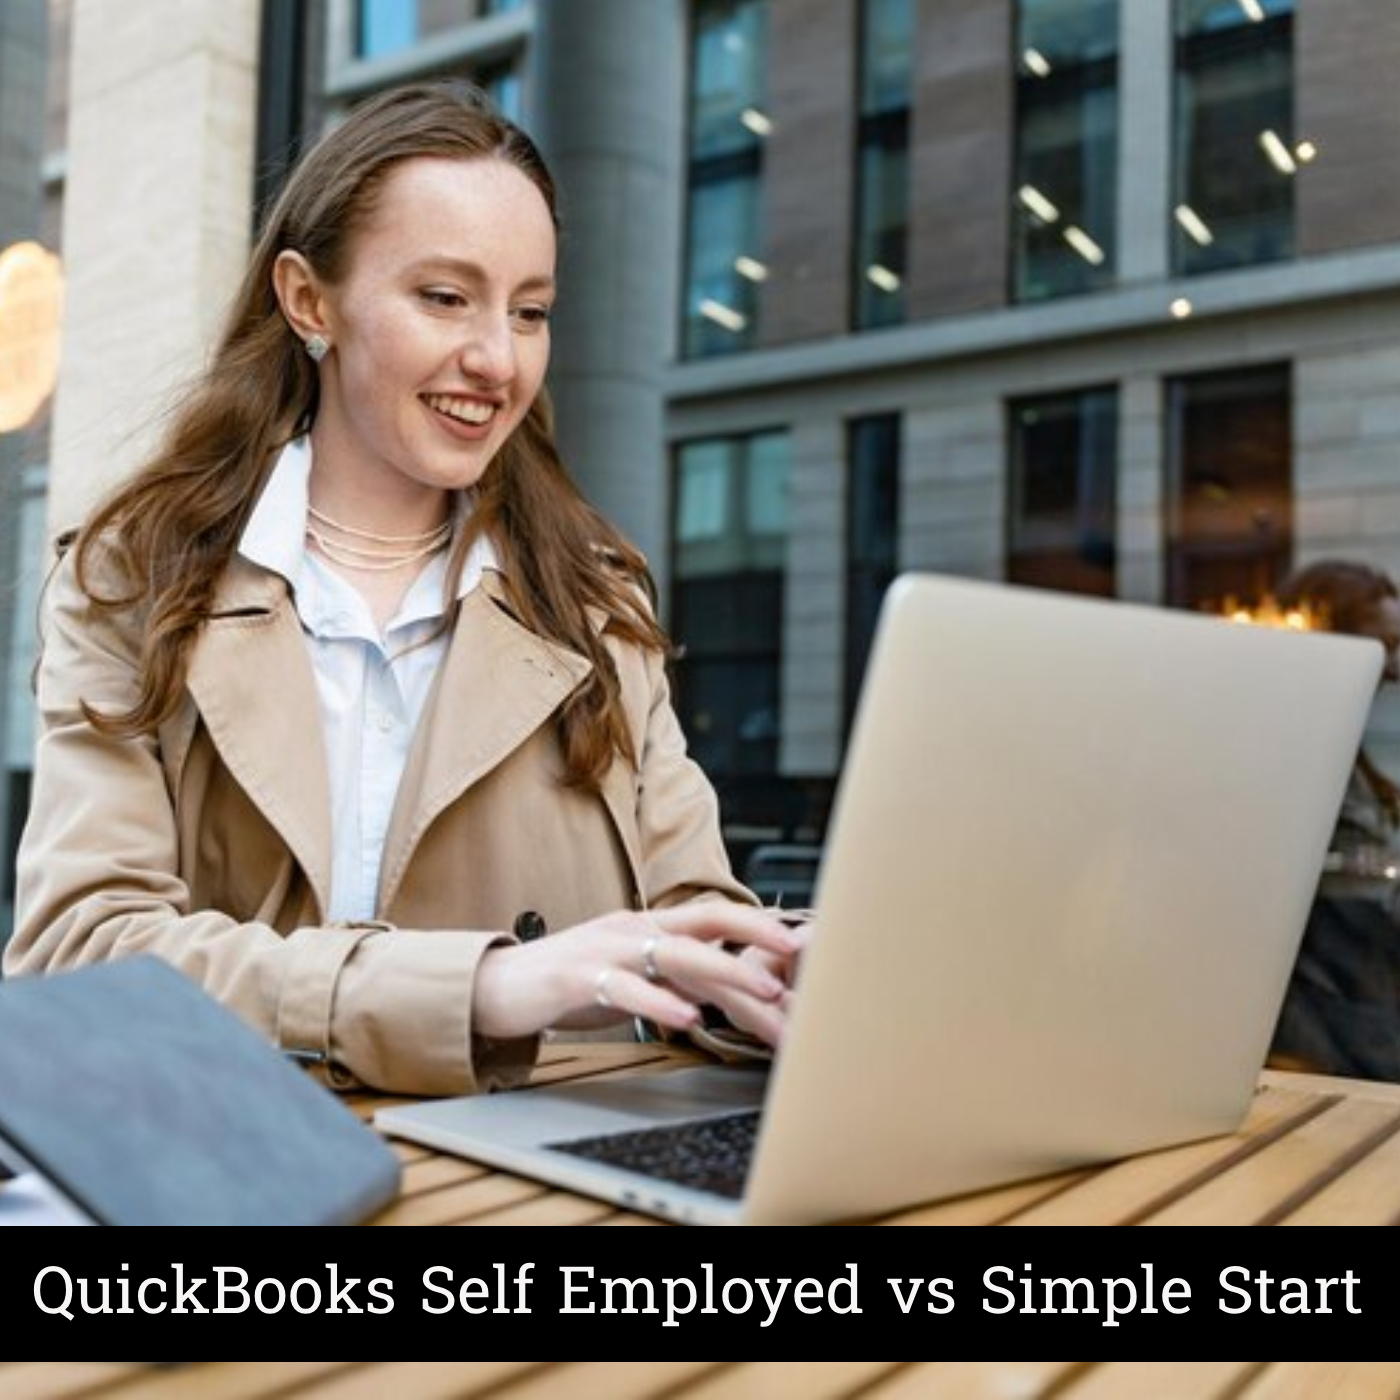 QuickBooks Self Employed vs Simple Start: Which is Right for You?